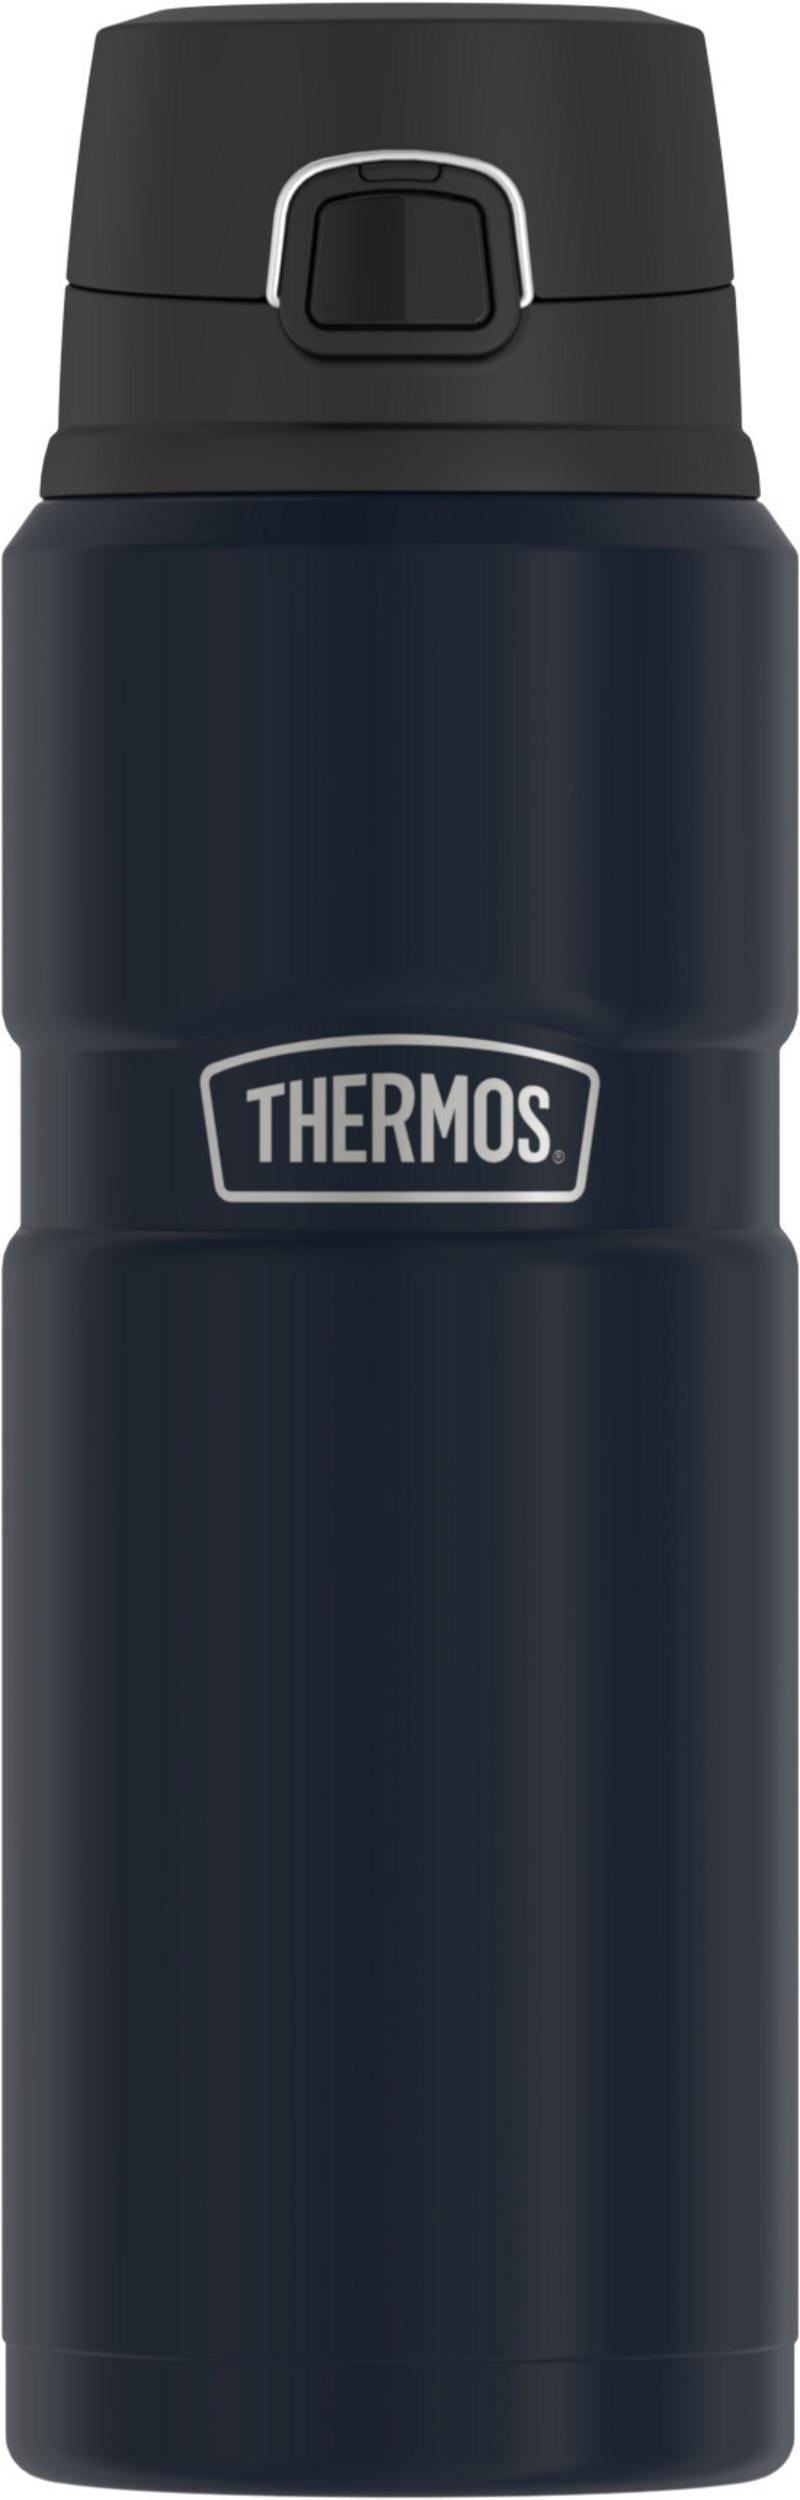 Thermos Batman Stormy Knight Lightning, THERMOS STAINLESS KING Stainless  Steel Drink Bottle, Vacuum insulated & Double Wall, 24oz